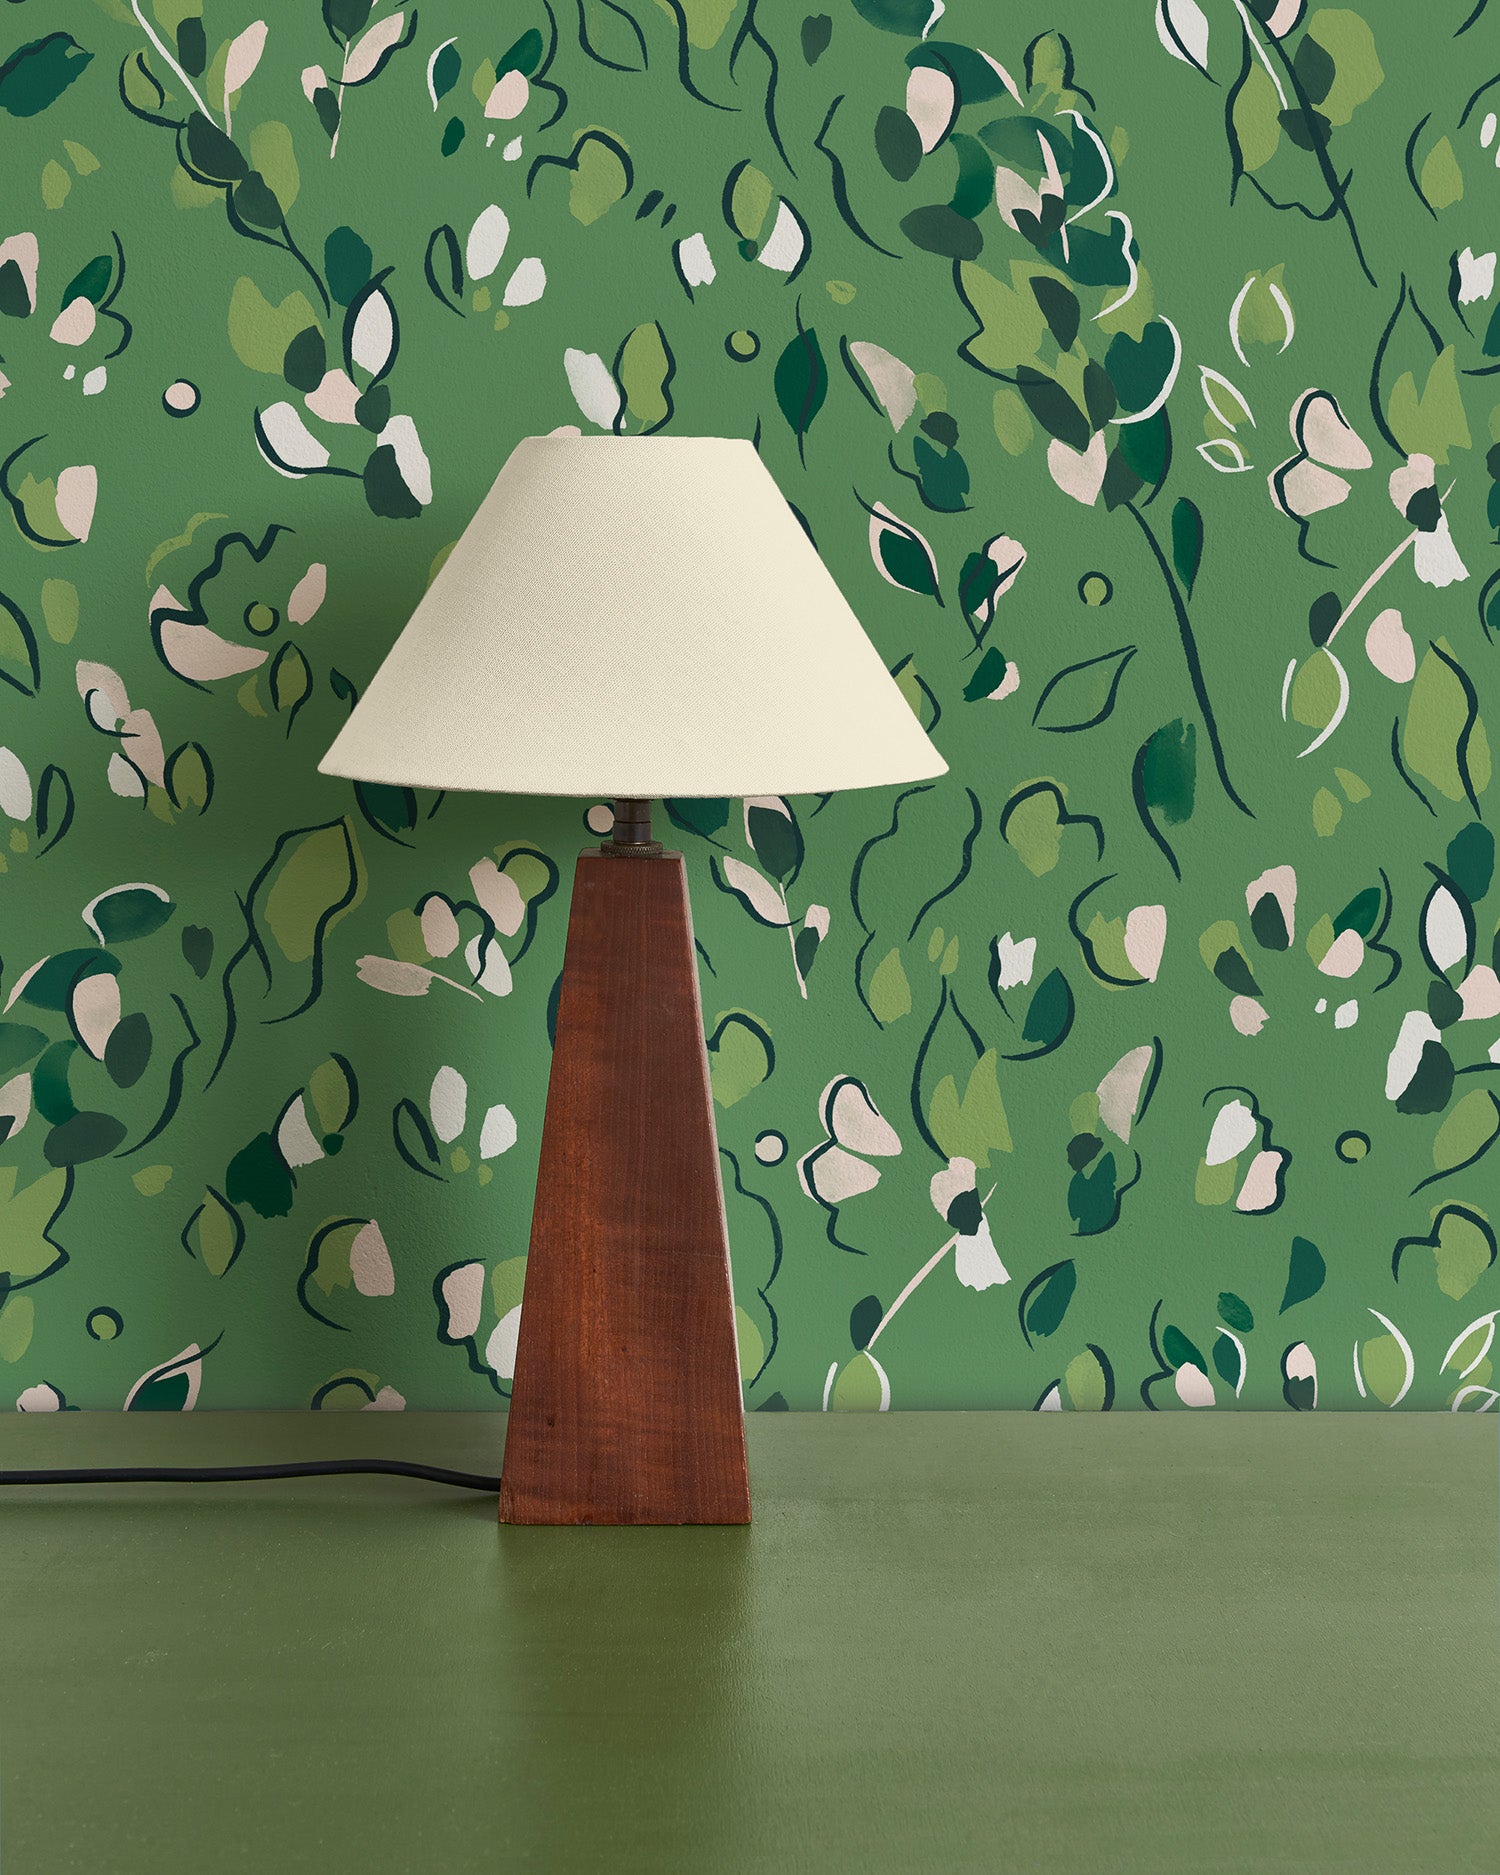 Modernist lamp in front of a wall papered in a painterly leaf print in shades of green.